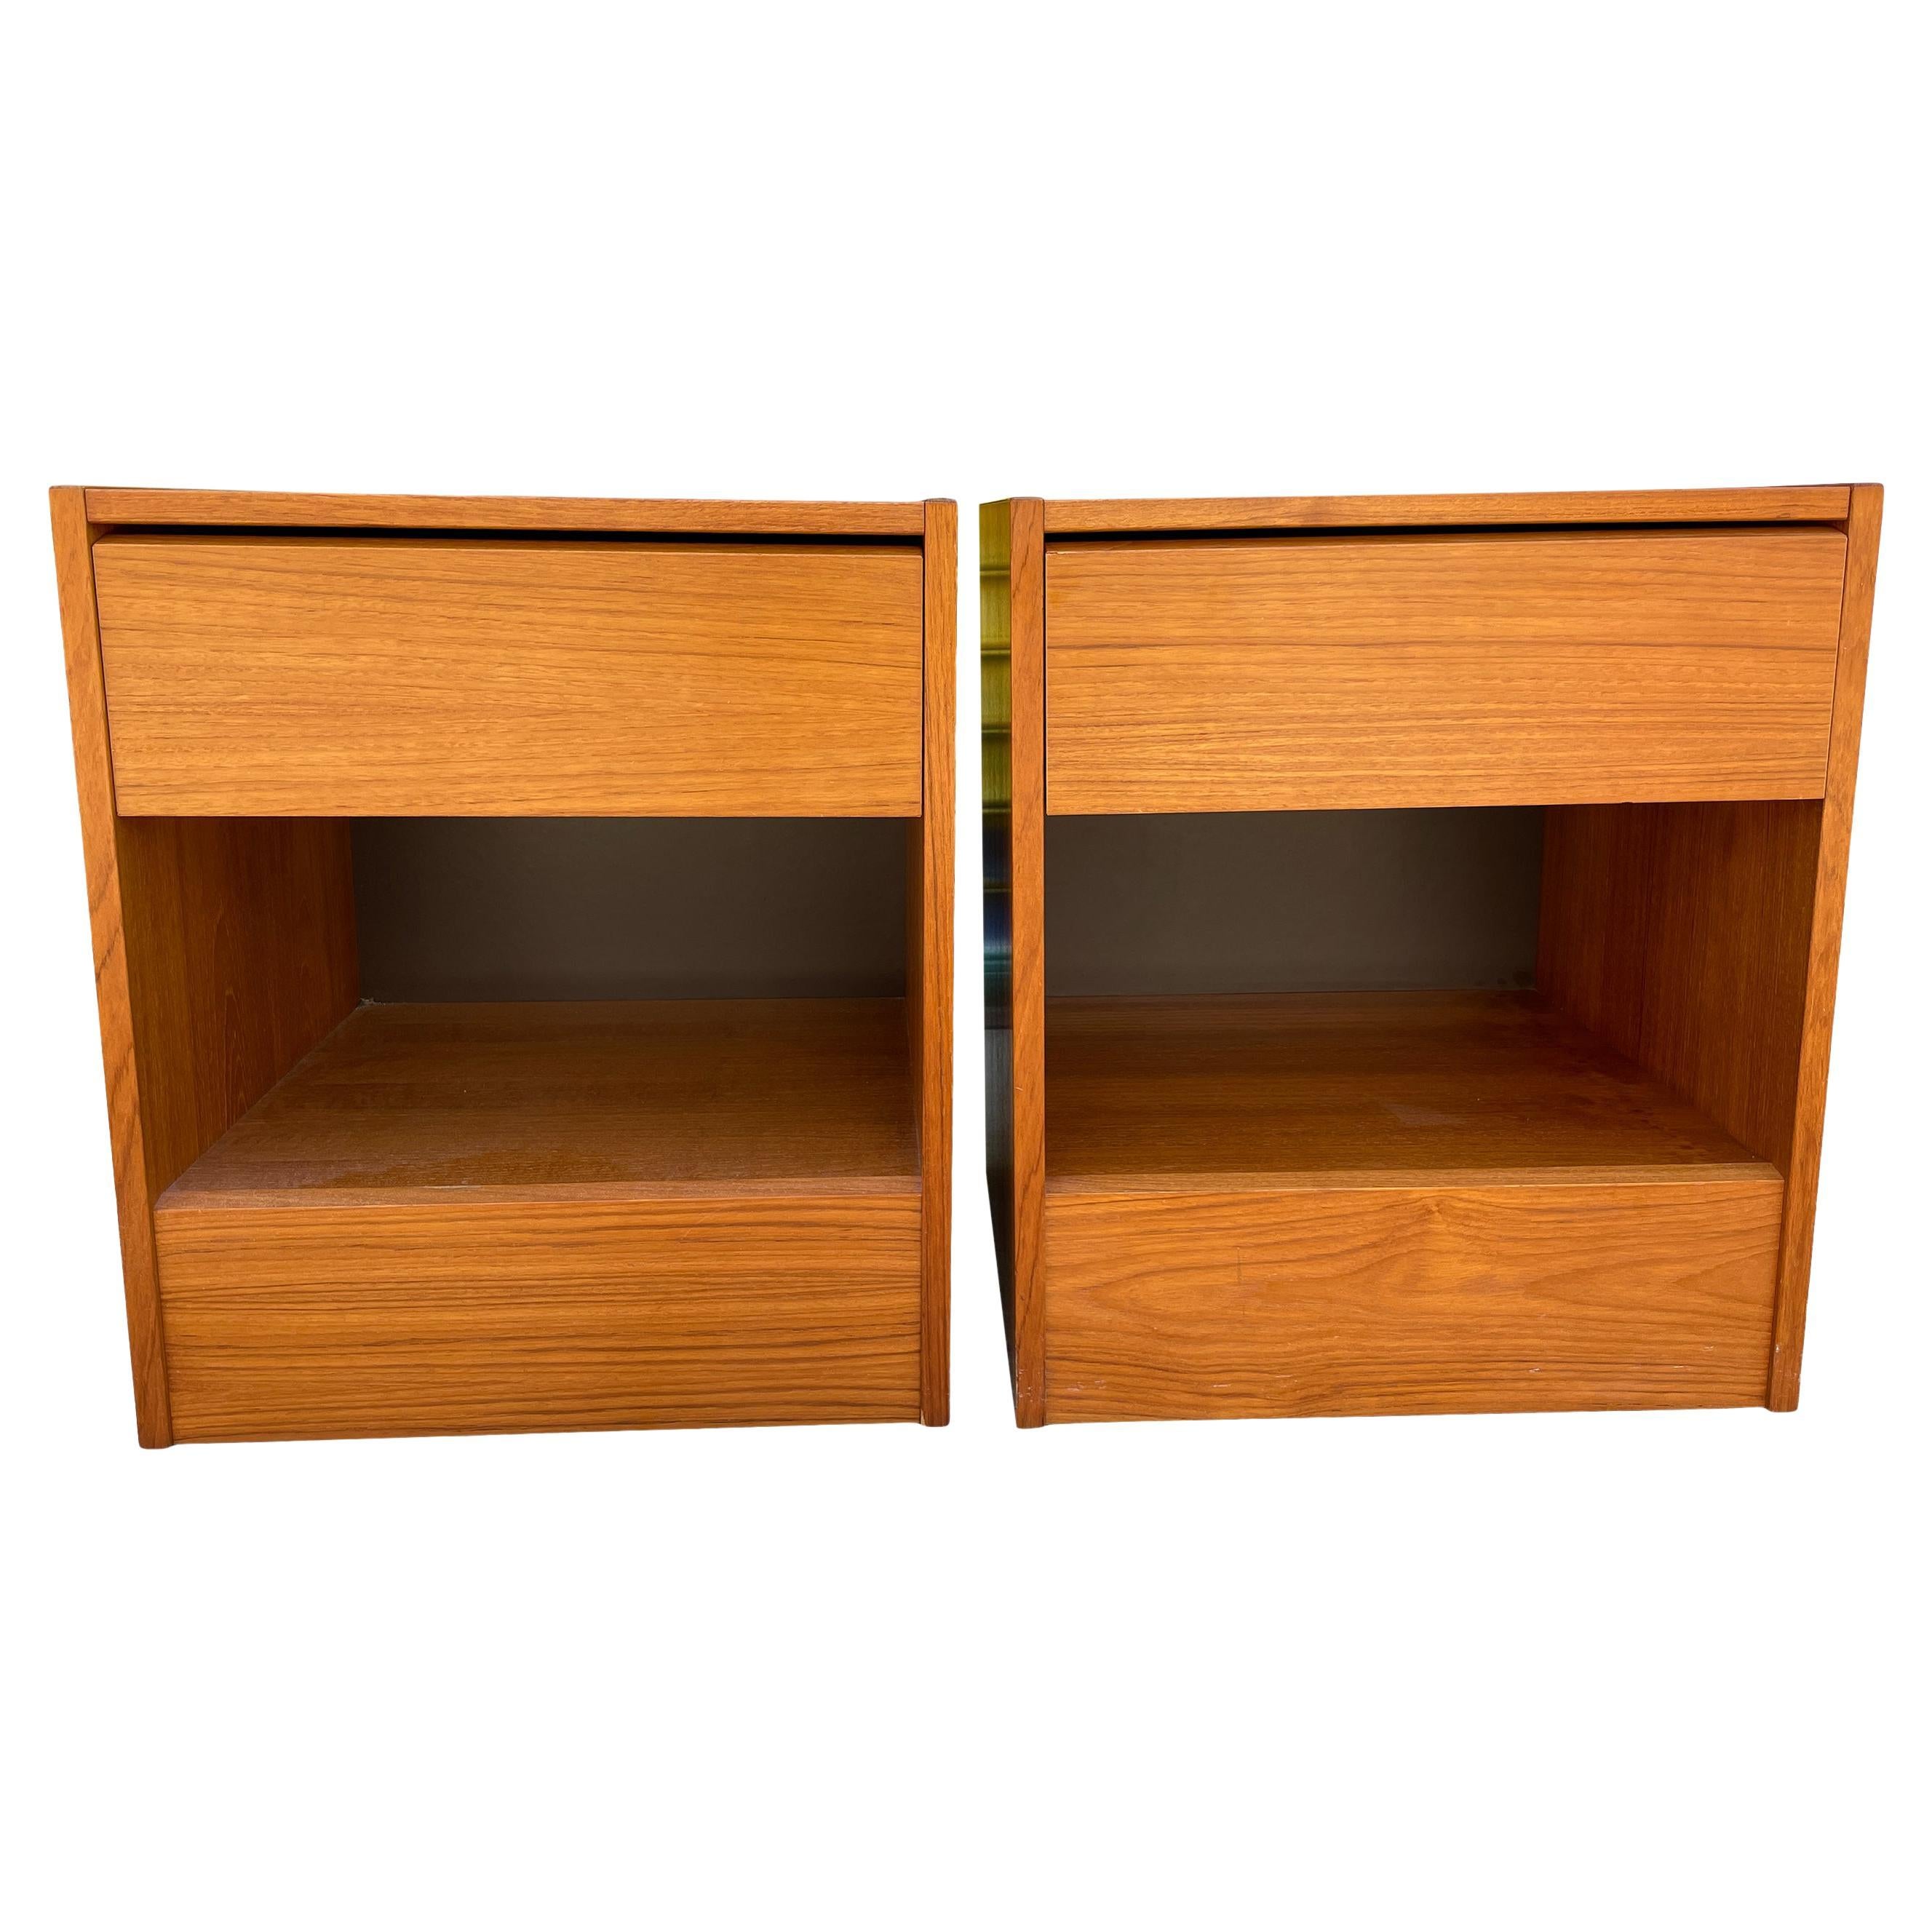 Beautiful pair of mid-century Danish modern teak single-drawer nightstands. Great simple design and great vintage condition - clean inside and out. Drawers slide smooth with glides and with open space below drawer. Great light teak Wood grain. Shows